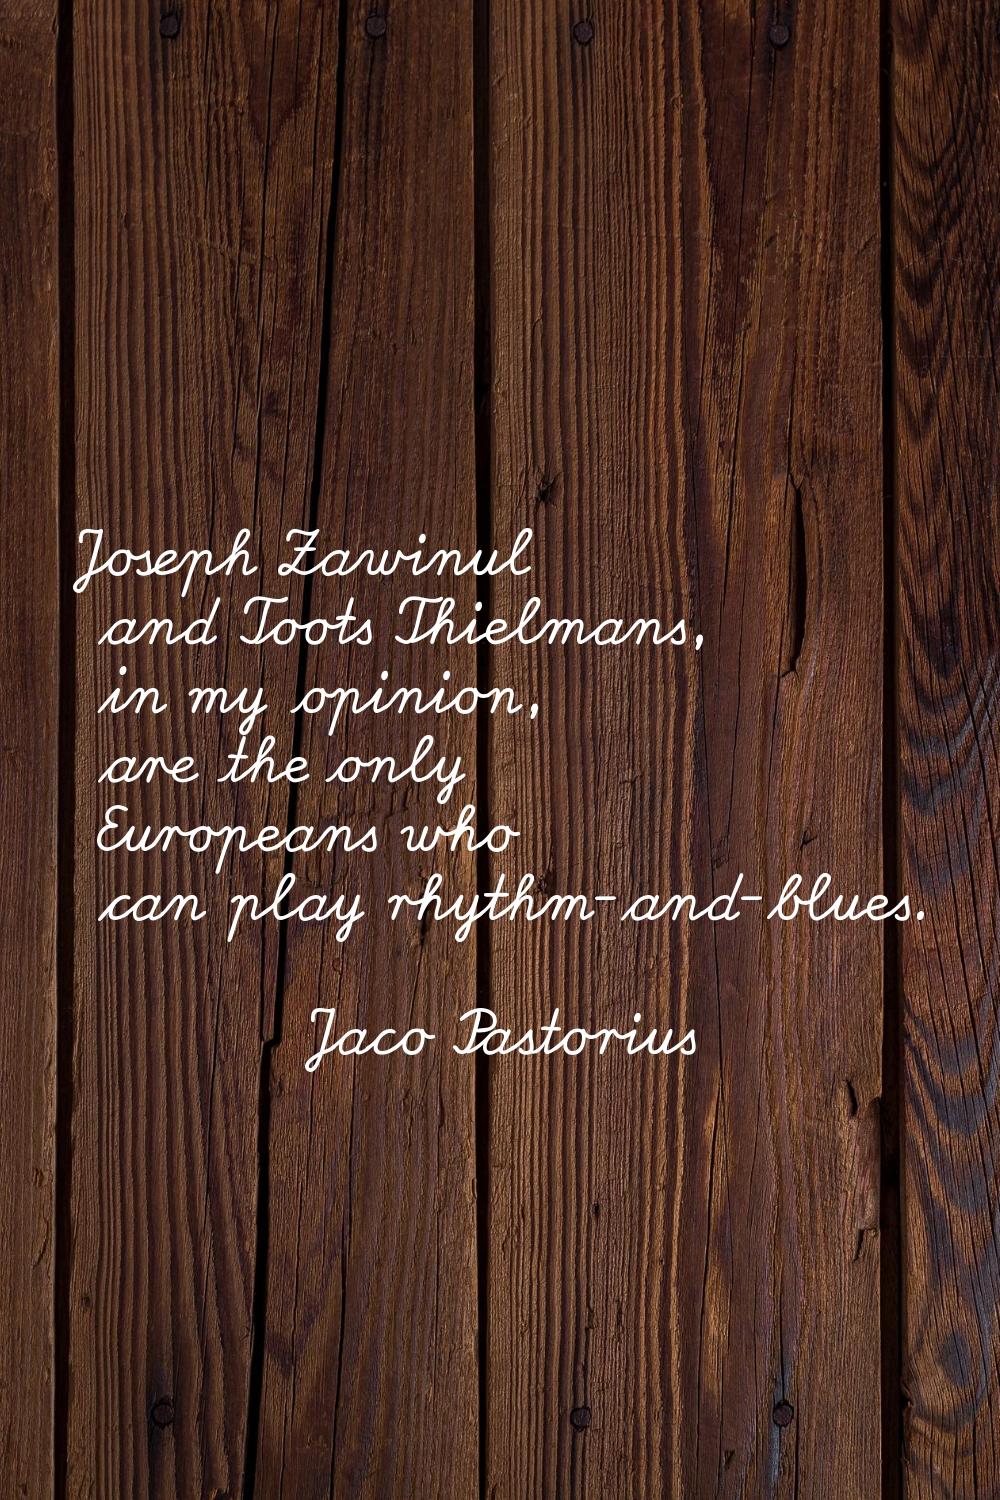 Joseph Zawinul and Toots Thielmans, in my opinion, are the only Europeans who can play rhythm-and-b